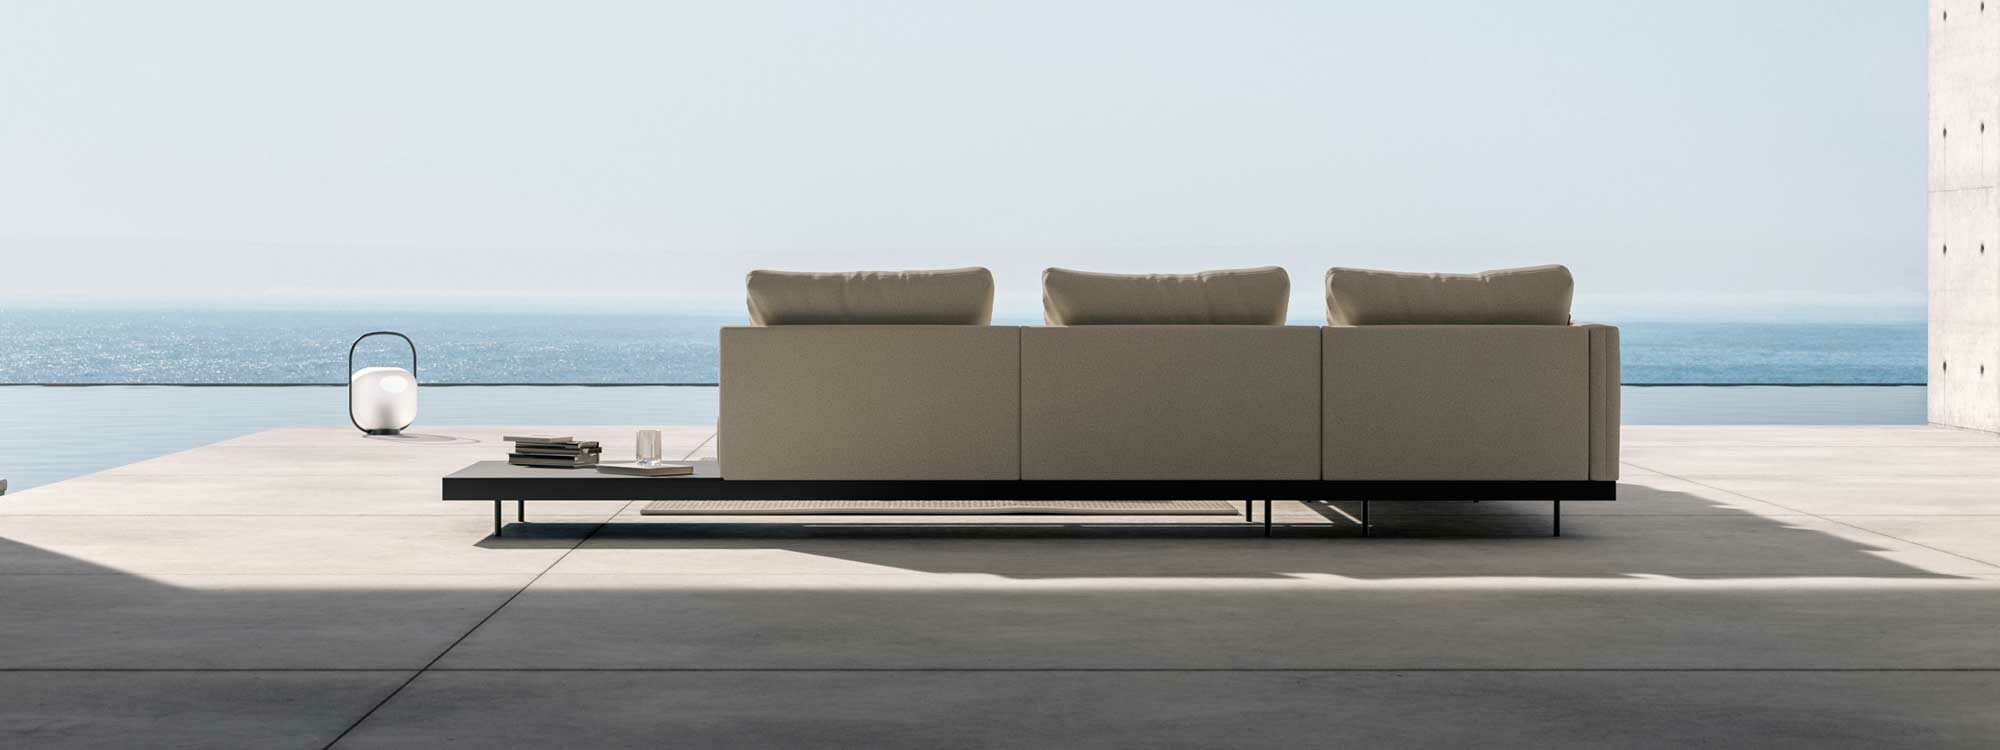 Image of rear of Dongo modern garden sofa by Todus, shown on concrete terrace with blue sea and sky in the background